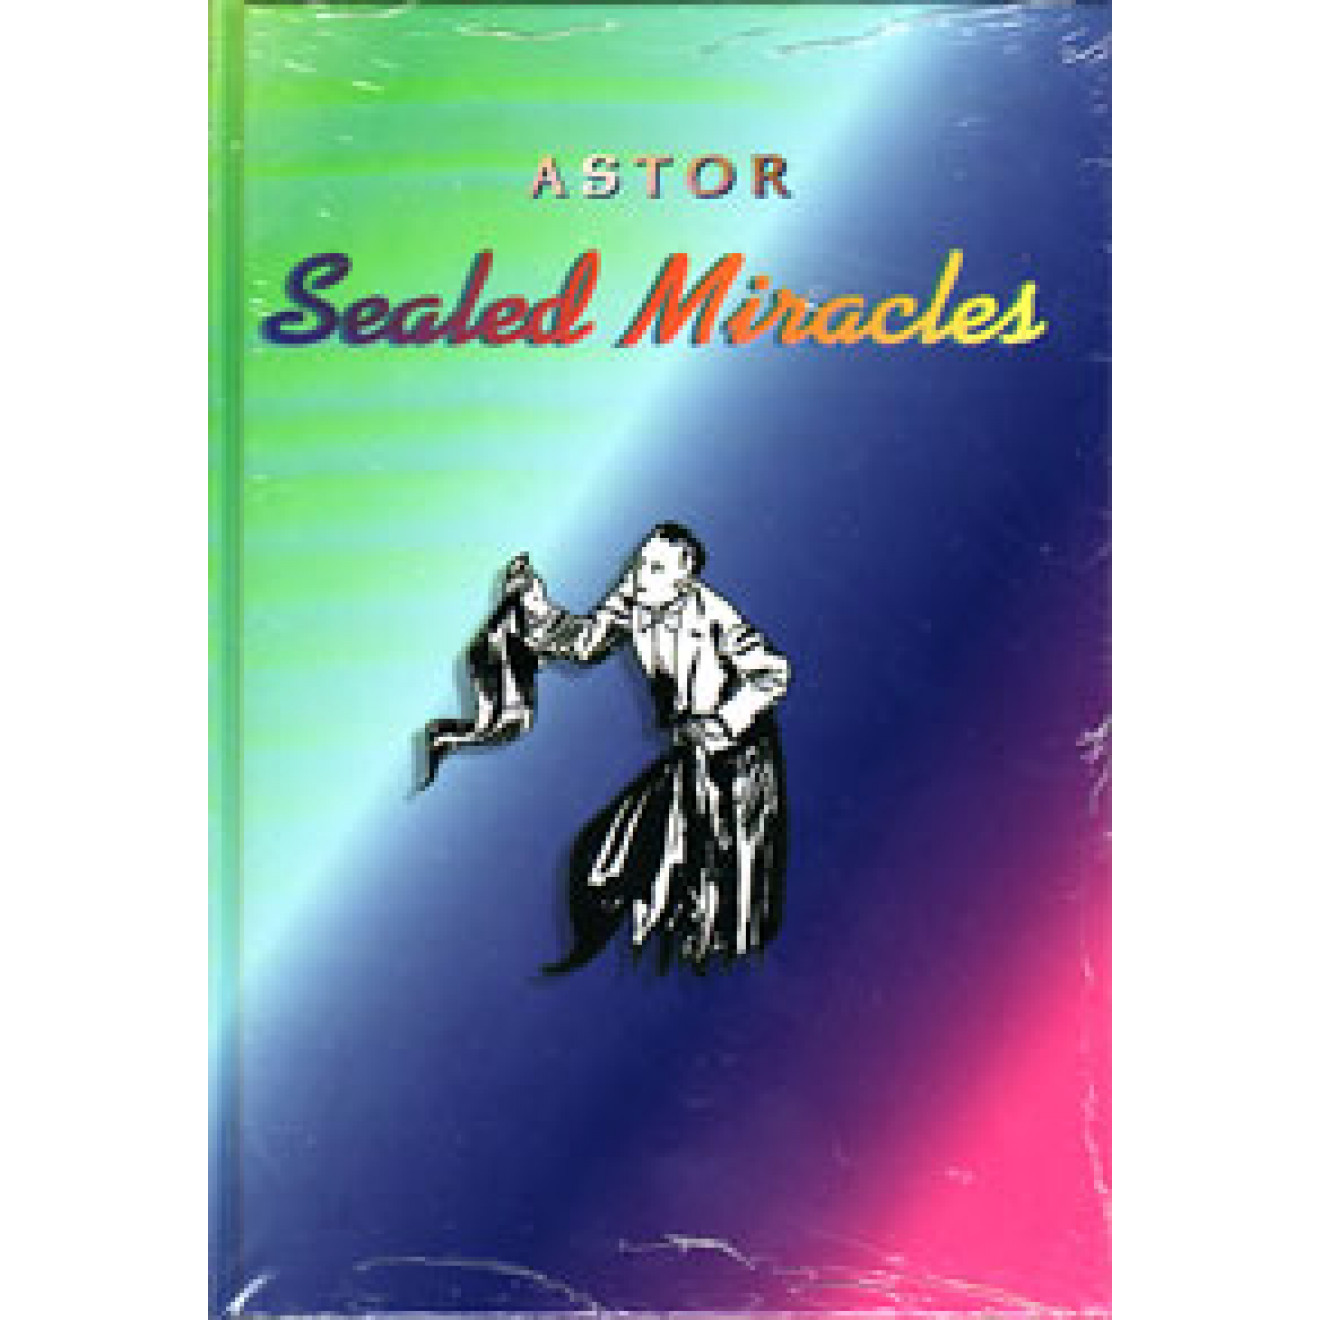 Sealed Miracles